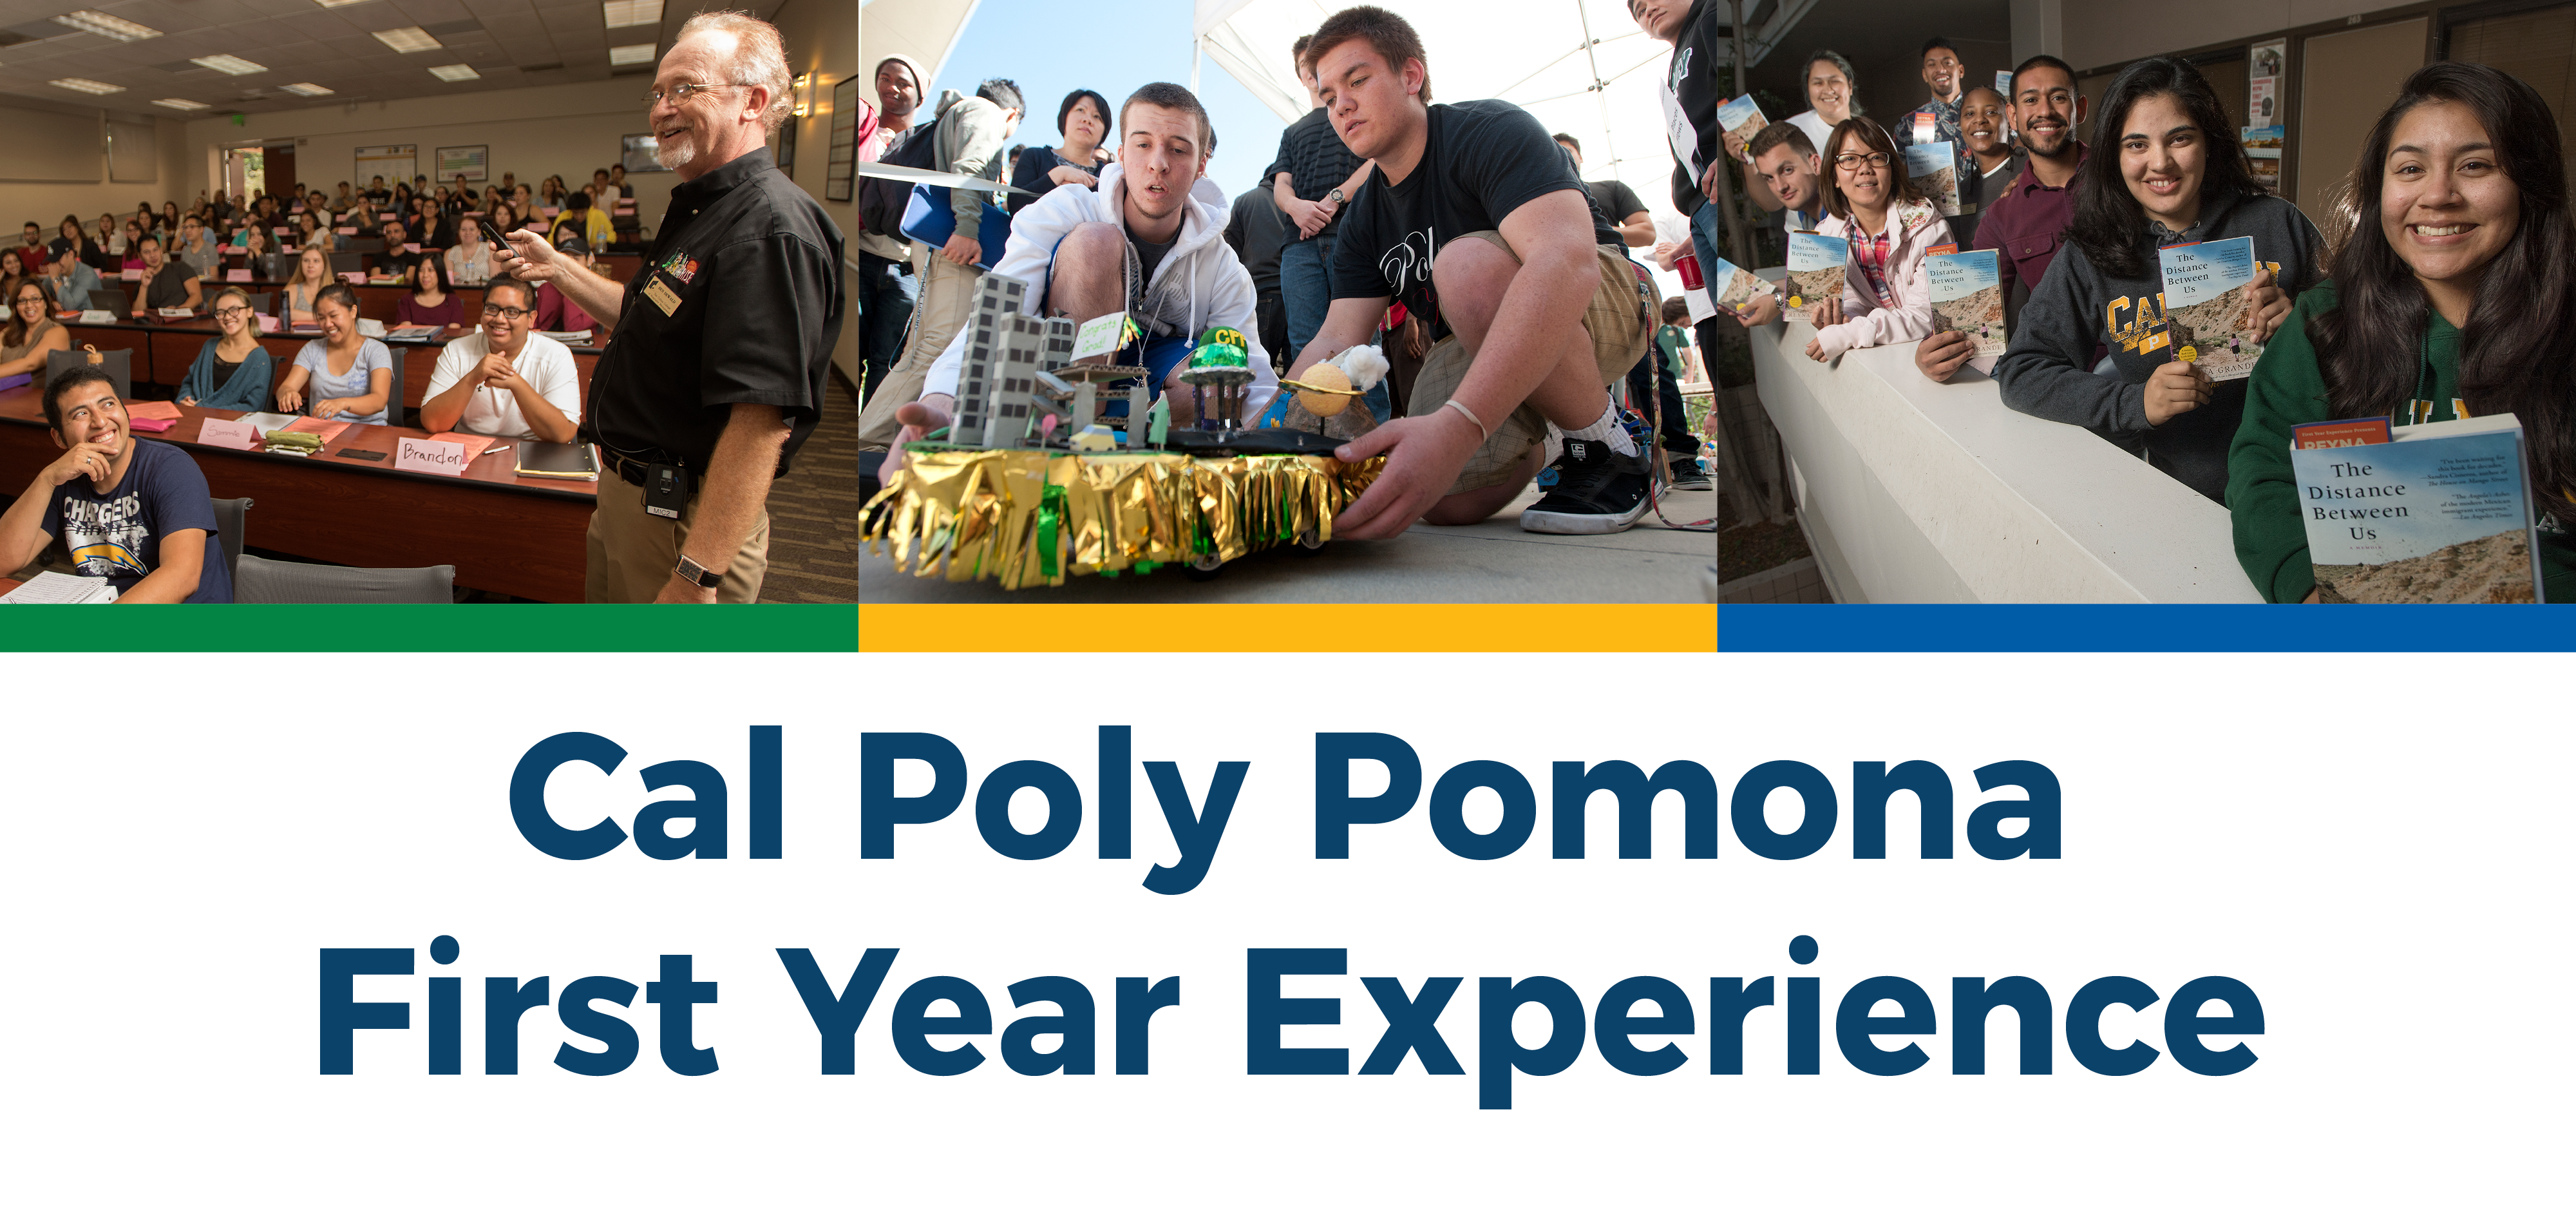 Cal Poly Pomona First Year Experience